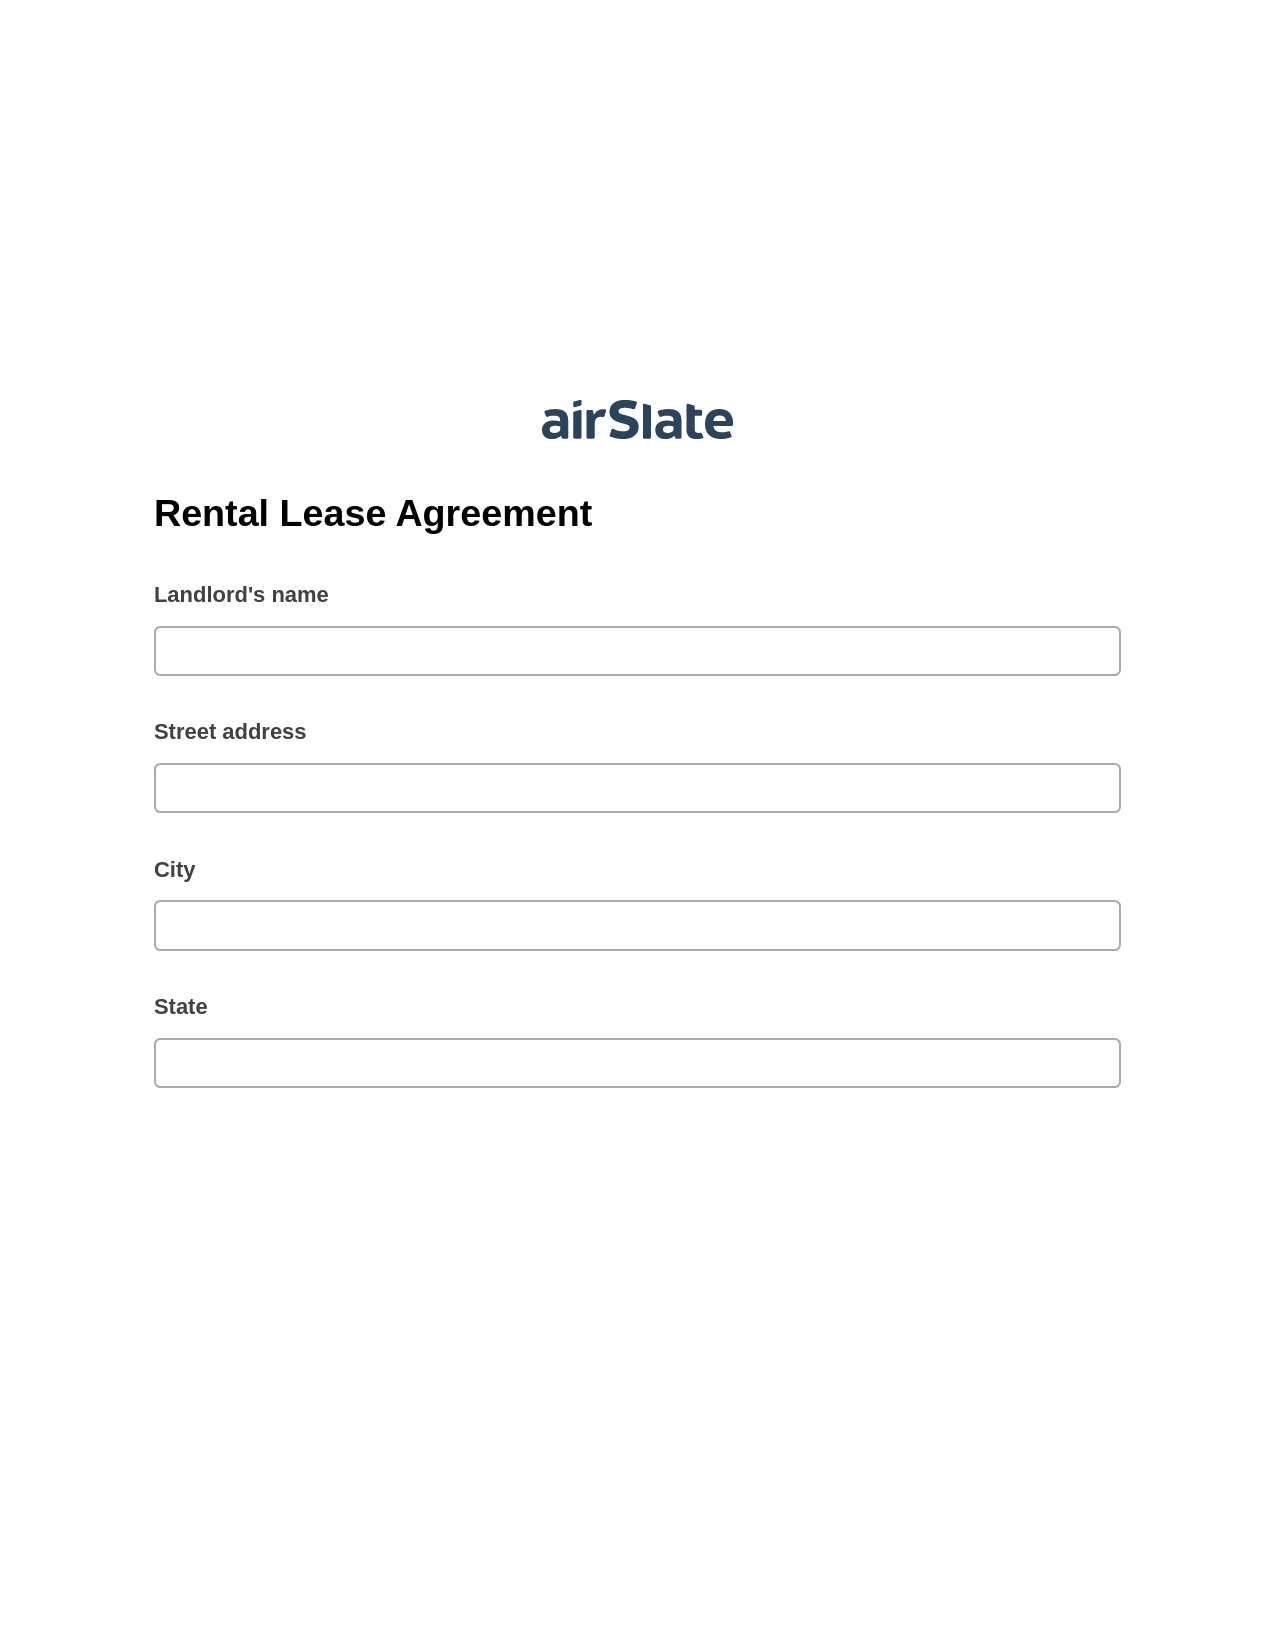 Rental Lease Agreement Pre-fill from Google Sheet Dropdown Options Bot, Google Cloud Print Bot, Export to Salesforce Bot